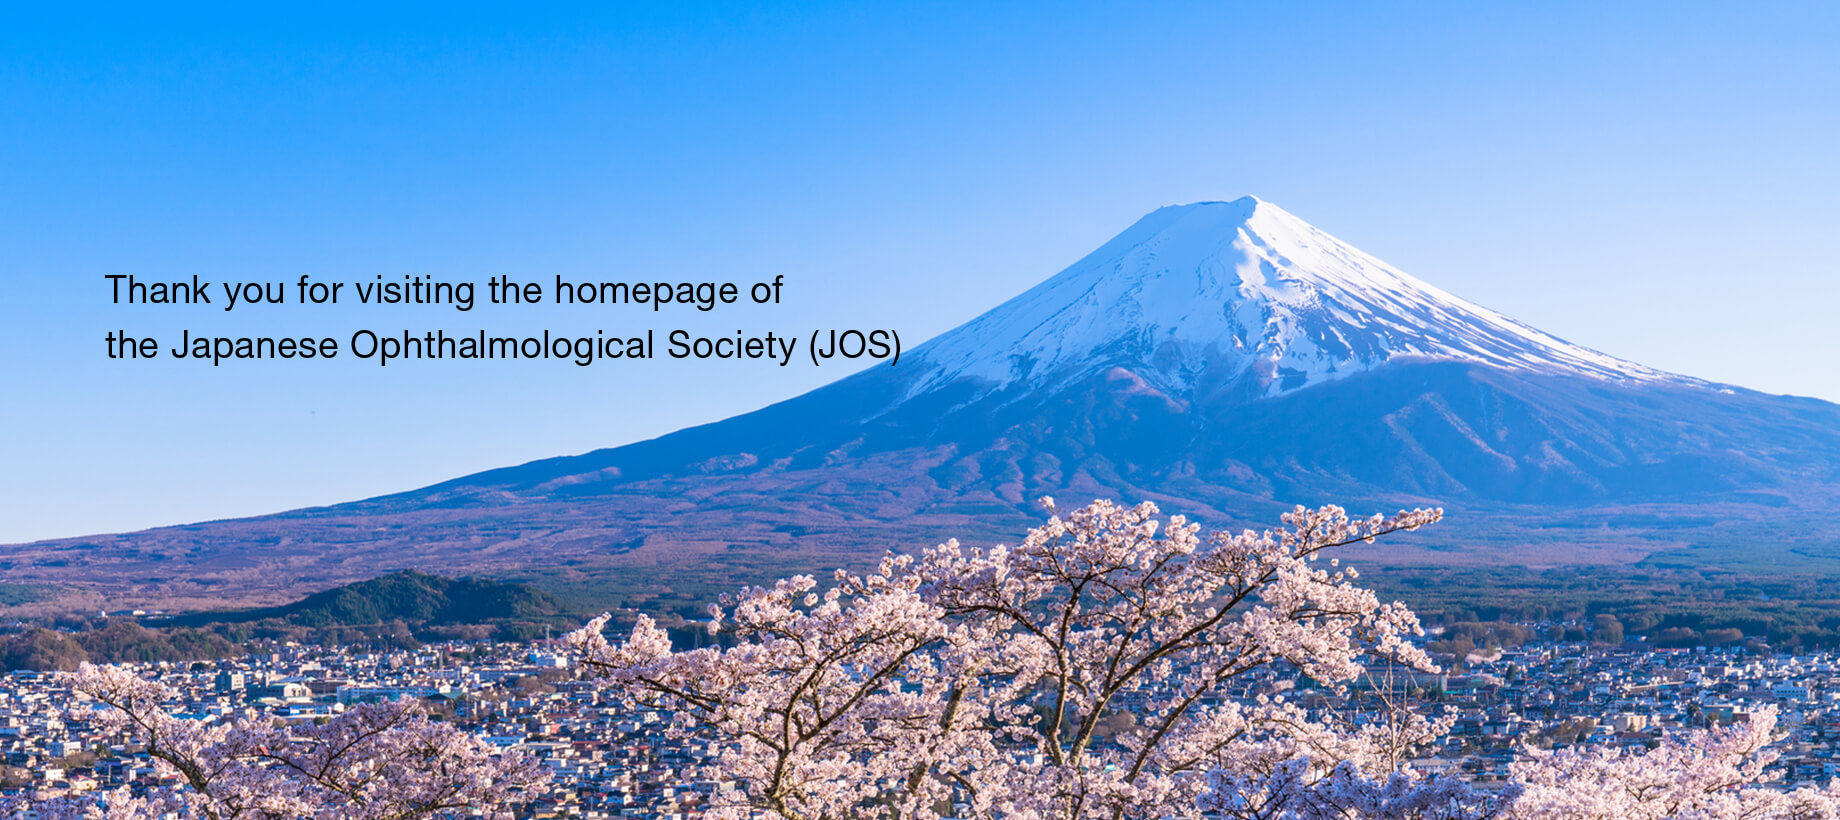 Thank you for visiting the homepage of the Japanese Ophthalmological Society(JOS)